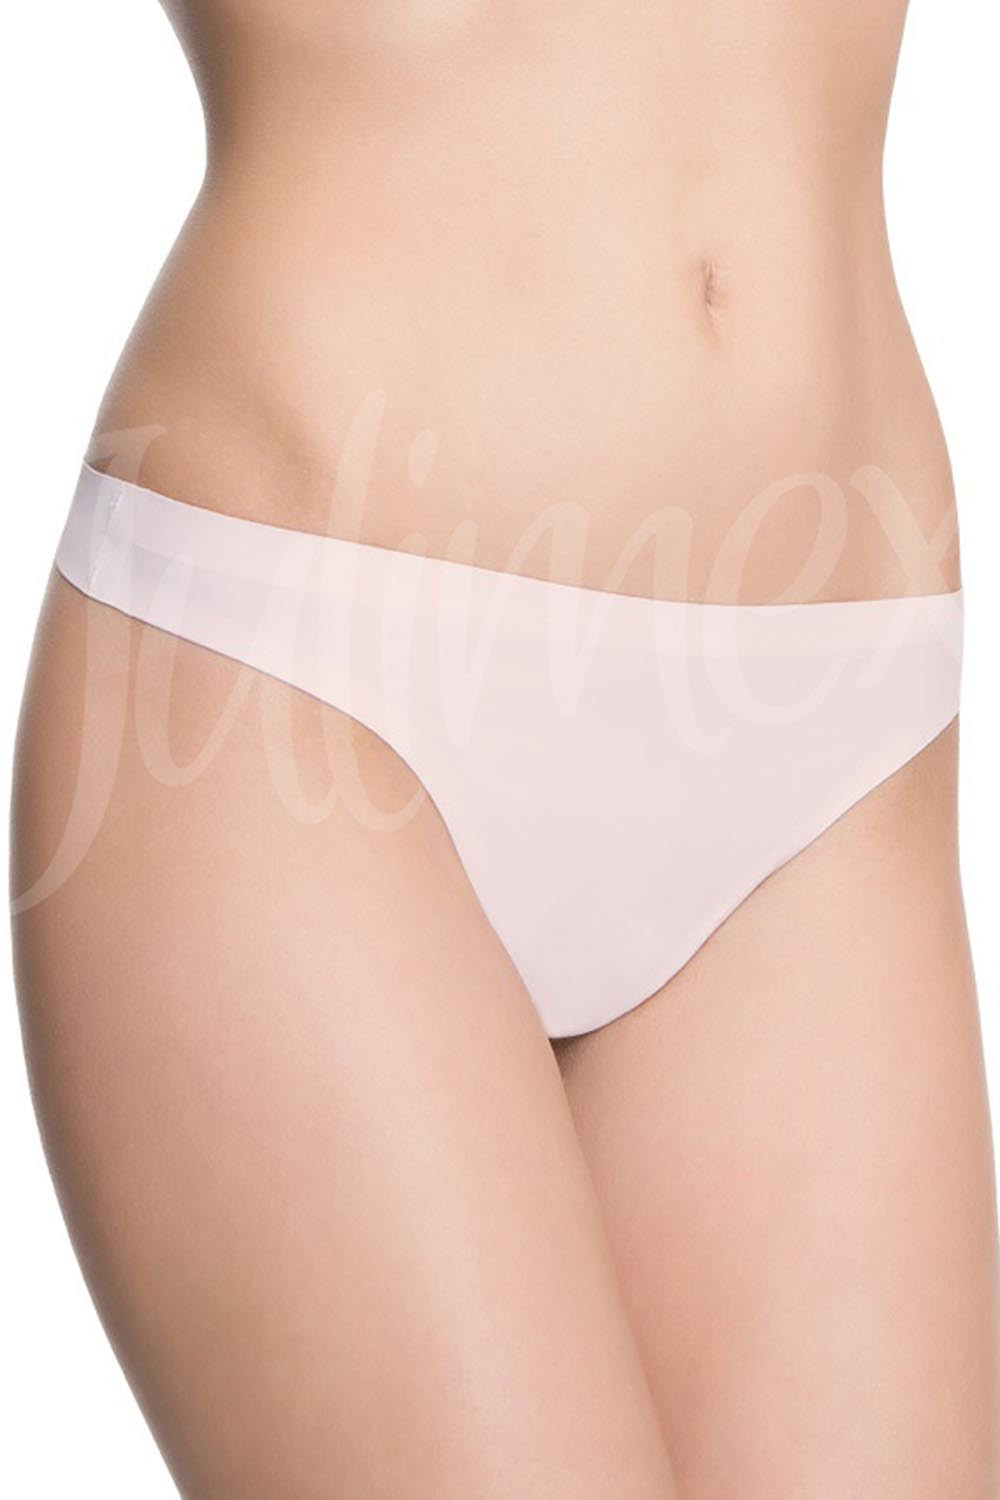 Julimex String panty kolor:beżowy M